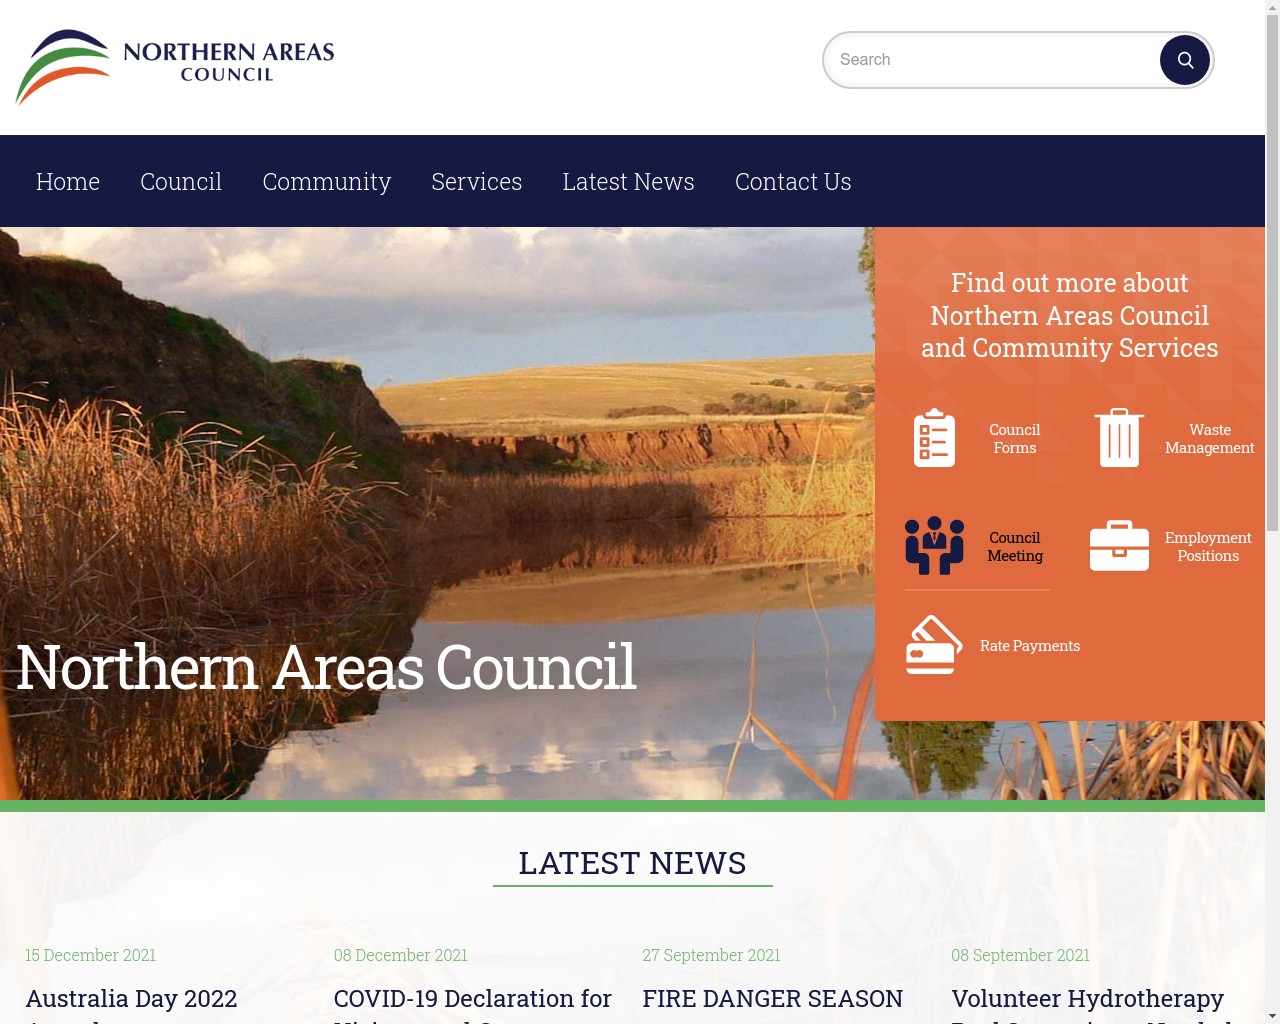 Northern Areas Council